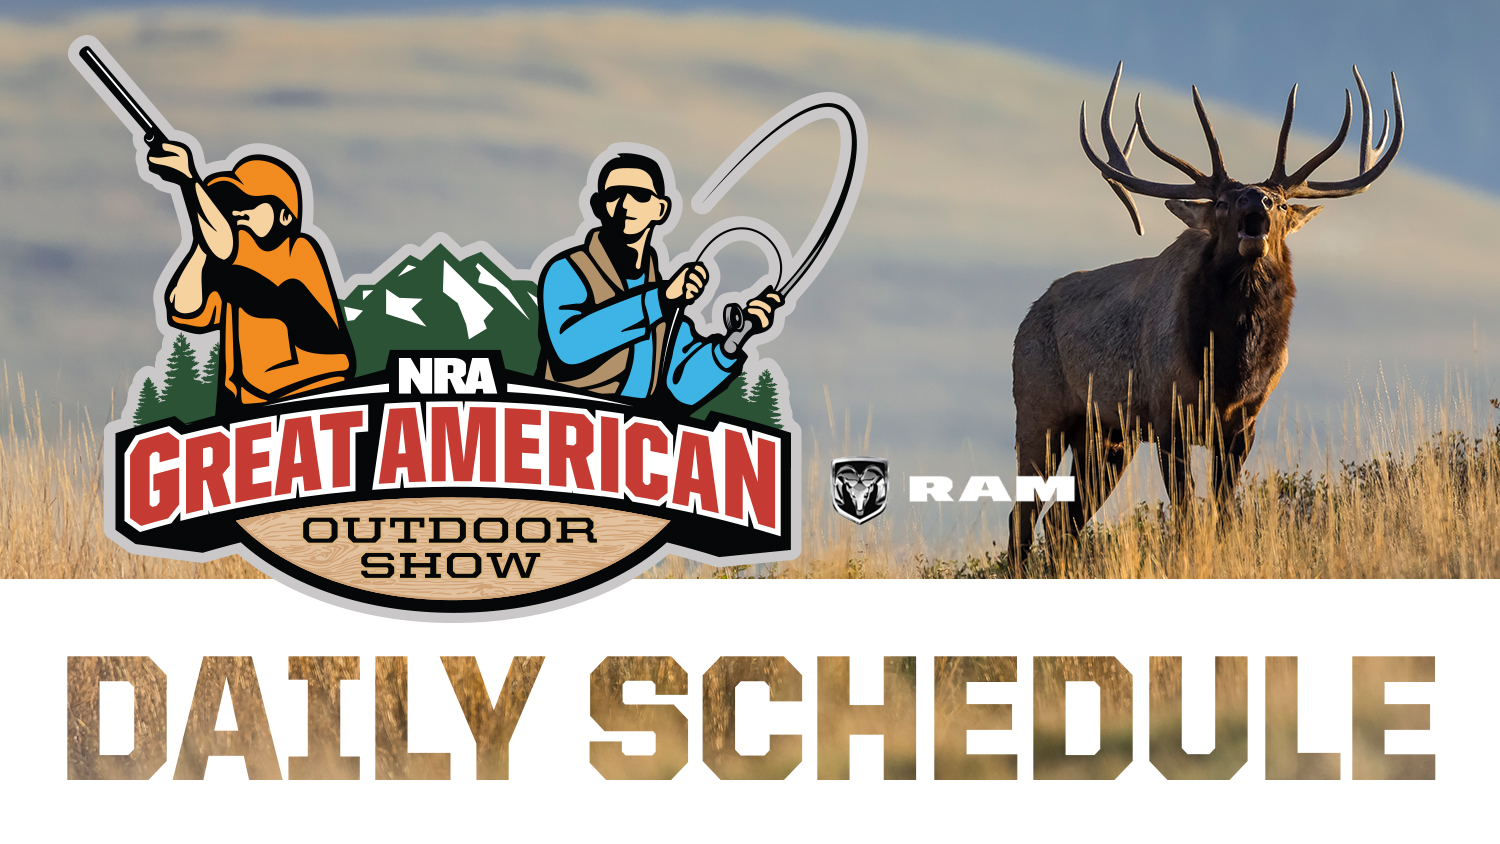 2019 Great American Outdoor Show Daily Schedule - Sunday, February 3